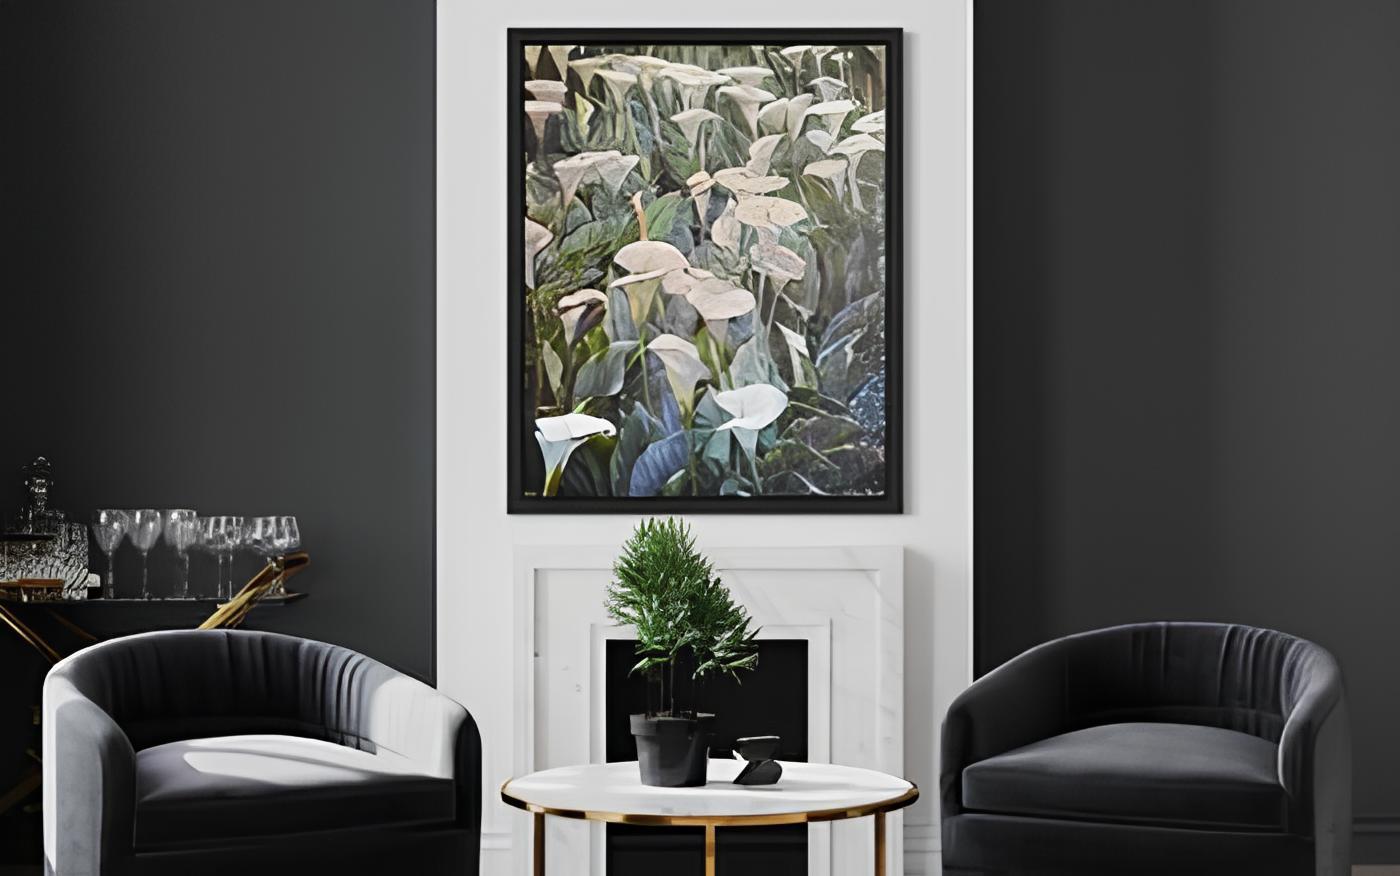 In this oil painting, I've immersed myself in the essence of tranquility, capturing the serene dance of leaves in dappled light. Each brushstroke is a whisper, a gentle hymn to nature's silent symphony. This piece embodies a peaceful pause, a visual